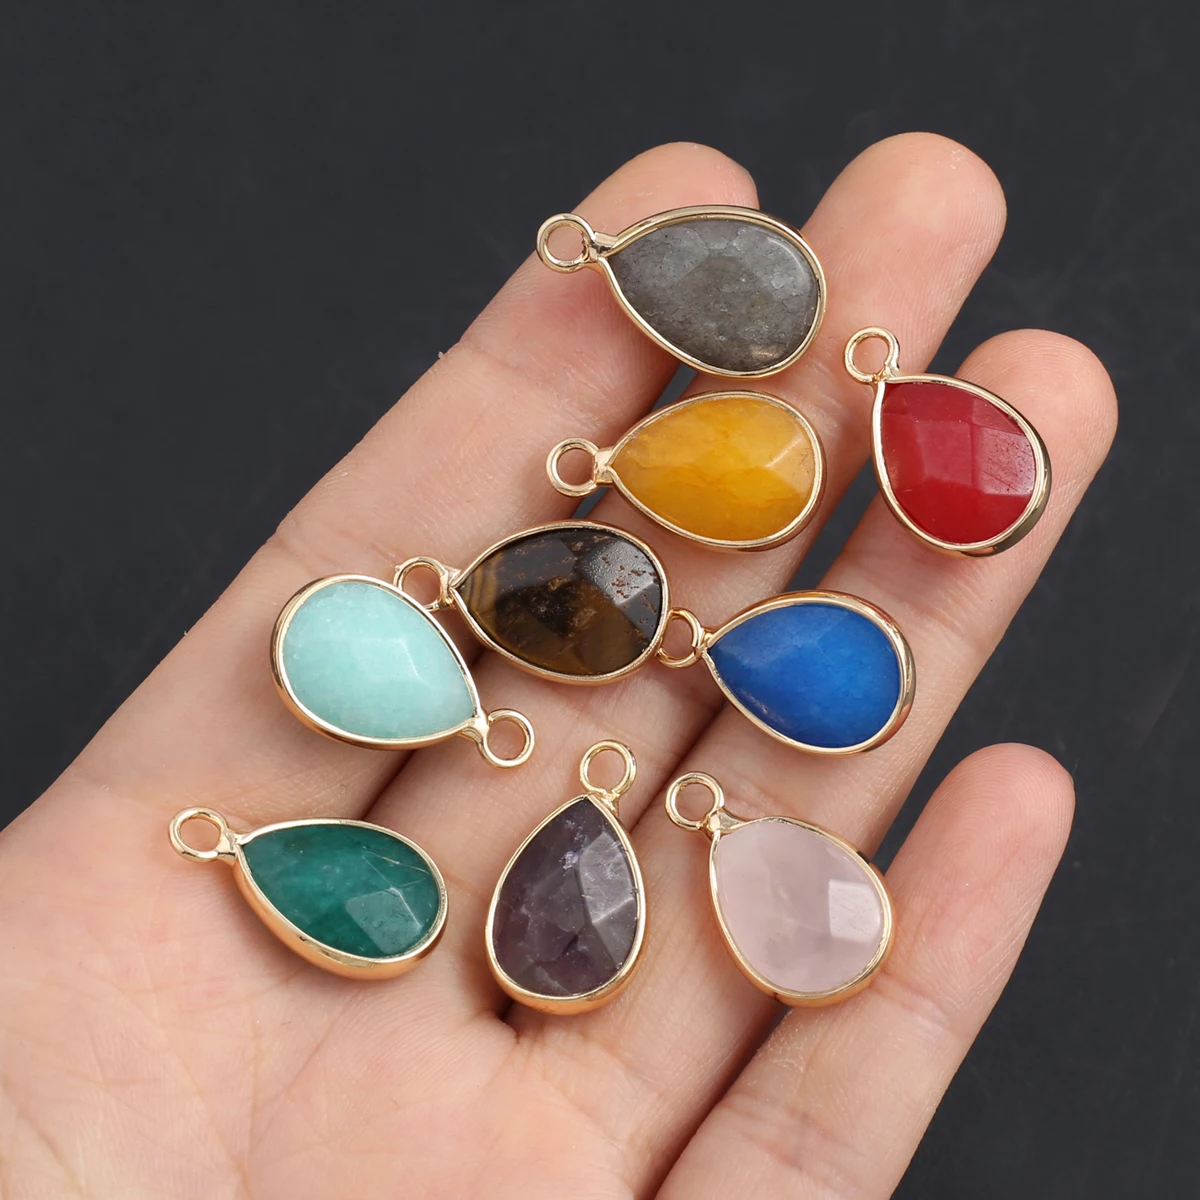 

15PCS Wholesale Natural Stone Random Color Water Droplet Gold Pendant Jewelry Making DIY Necklace Earrings Accessories Gift